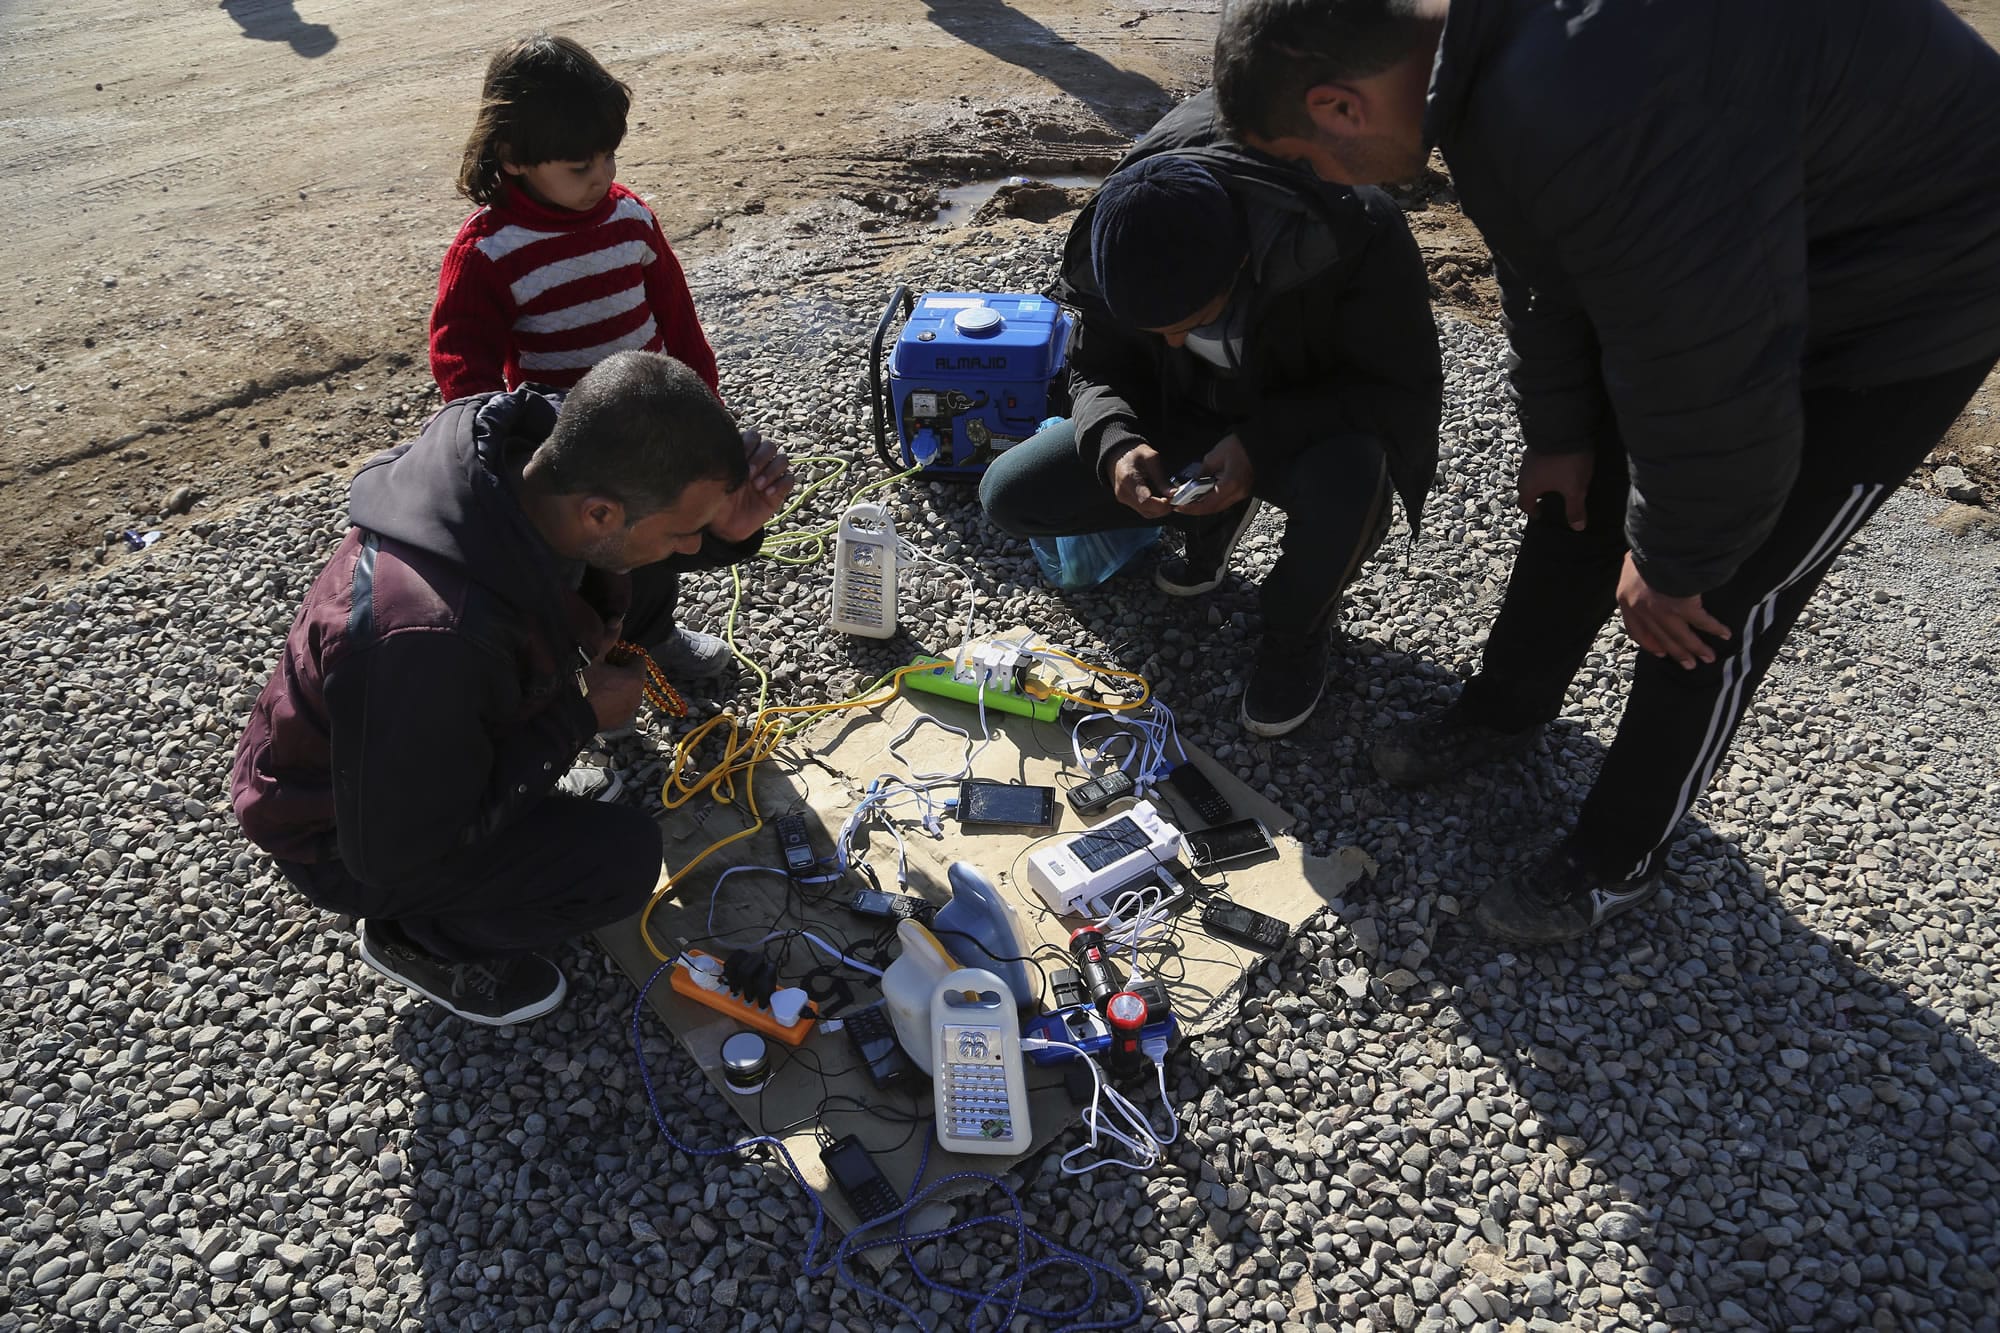 Displaced Iraqis, who fled fighting between Iraqi security forces and Islamic State militants, wait to charge their mobile phones and electrical lanterns, the generator owner charging 500 Iraqi dinars (about 45 U.S. cents) to charge each mobile phone, at Sewdinan Camp for the displaced near Khazer, Iraq on Tuesday, Jan. 3, 2017.